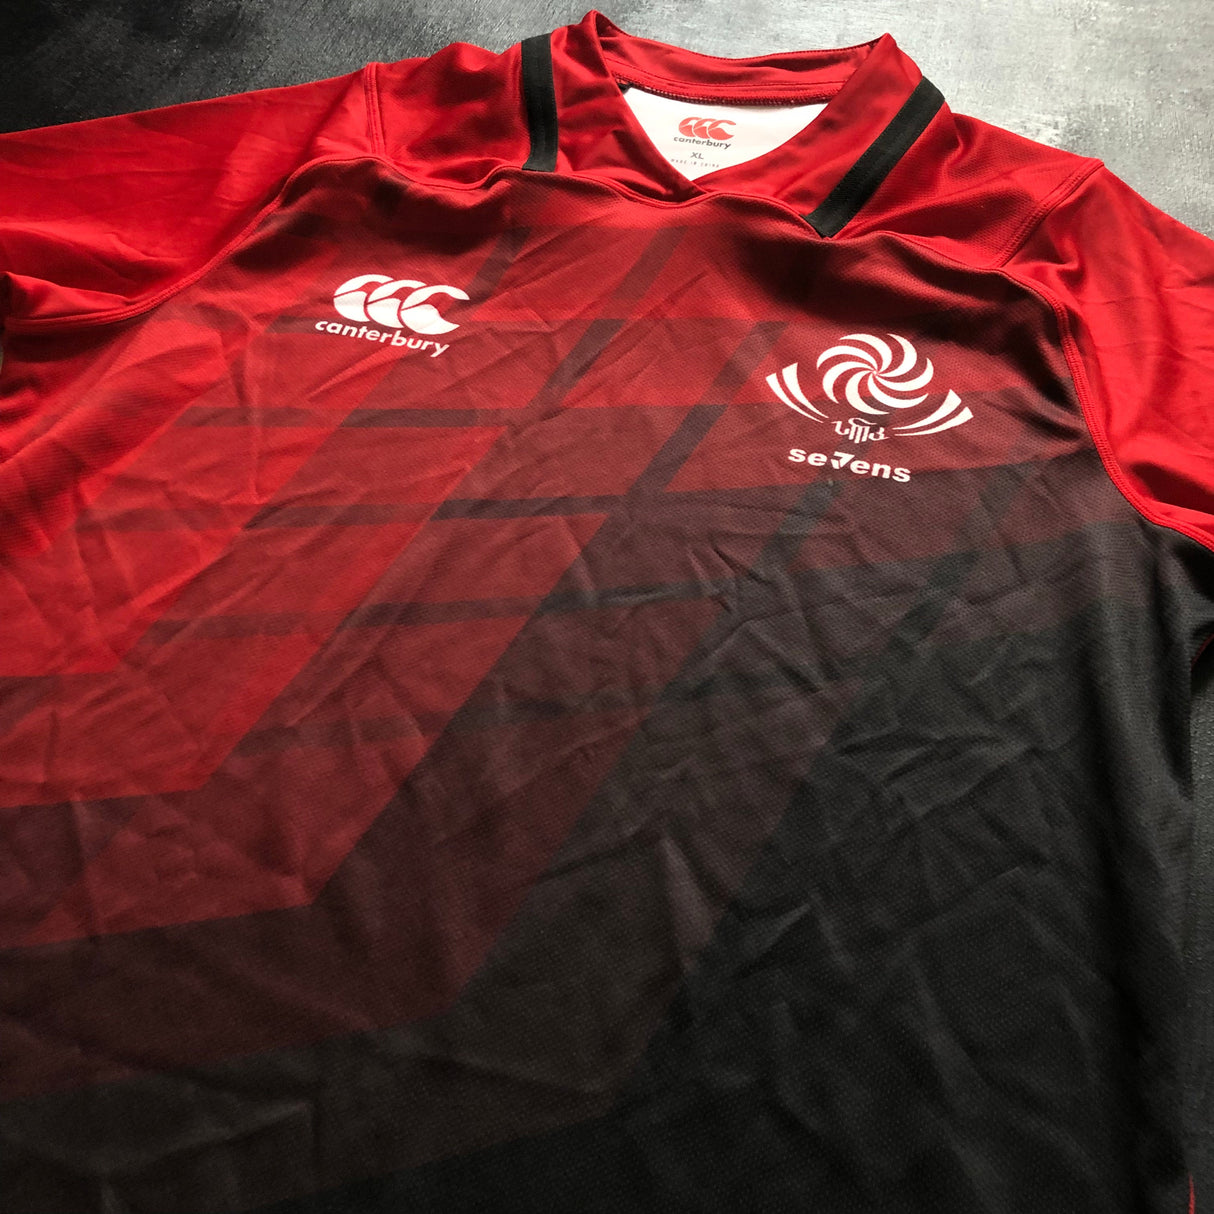 Georgia National Rugby Sevens Team Jersey 2019 XL Underdog Rugby - The Tier 2 Rugby Shop 